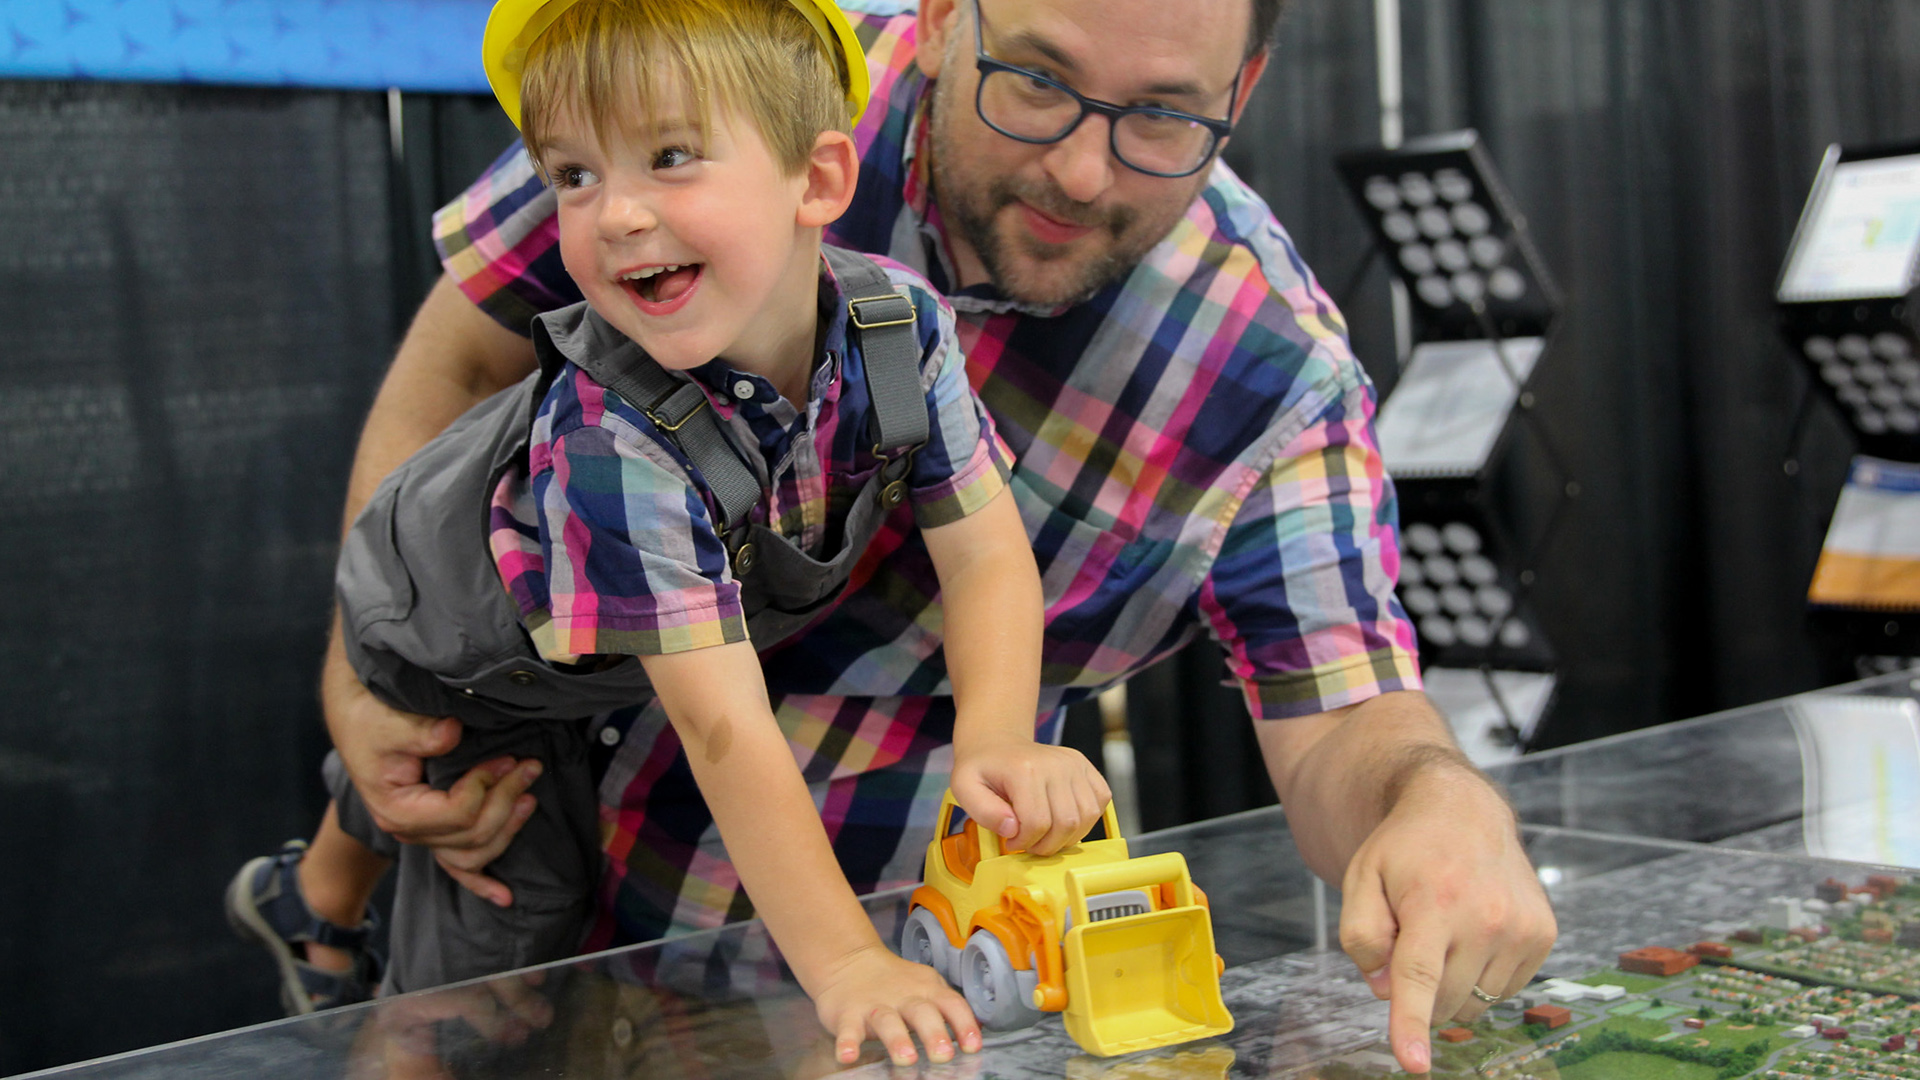 Robin Palm holds his son with his right arm while leaning over and pointing with his left hand toward a tabletop model display of a community under a transparent cover, with portable curtain room dividers in the background.